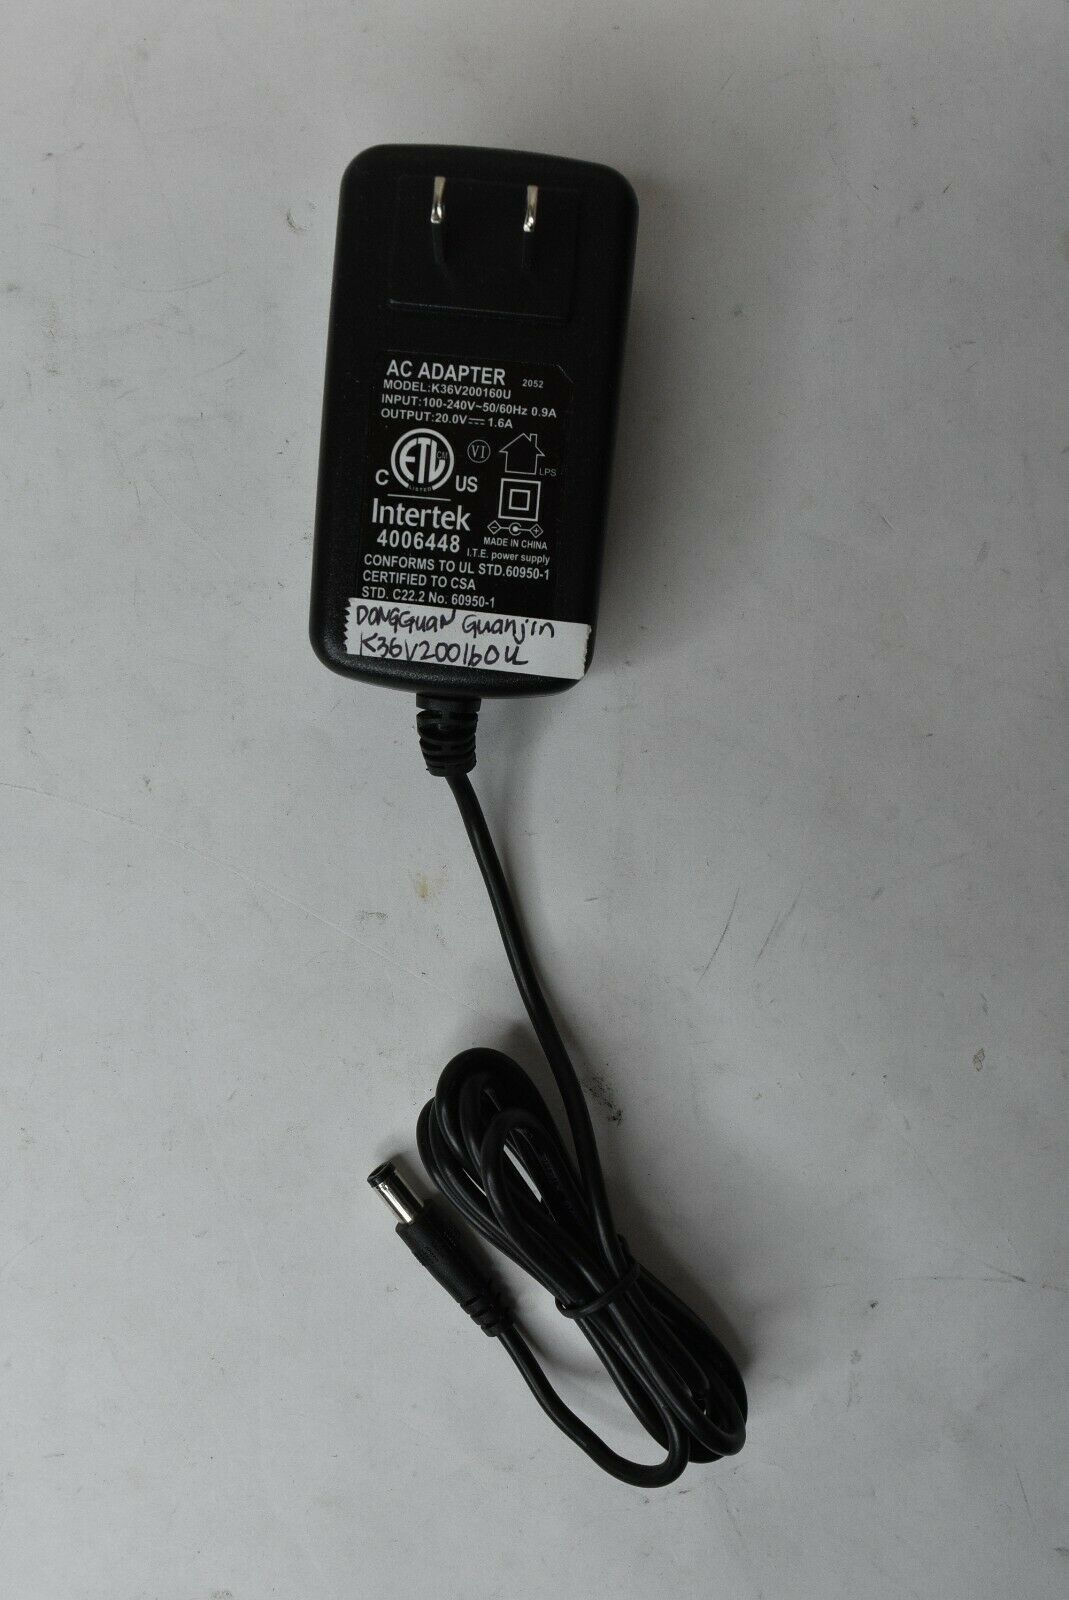 Dongguan Guanjin AC Adapter Power Supply Unit K36V200160U 20V 1.6A Features: Powered Output Voltage: 20 V Brand: